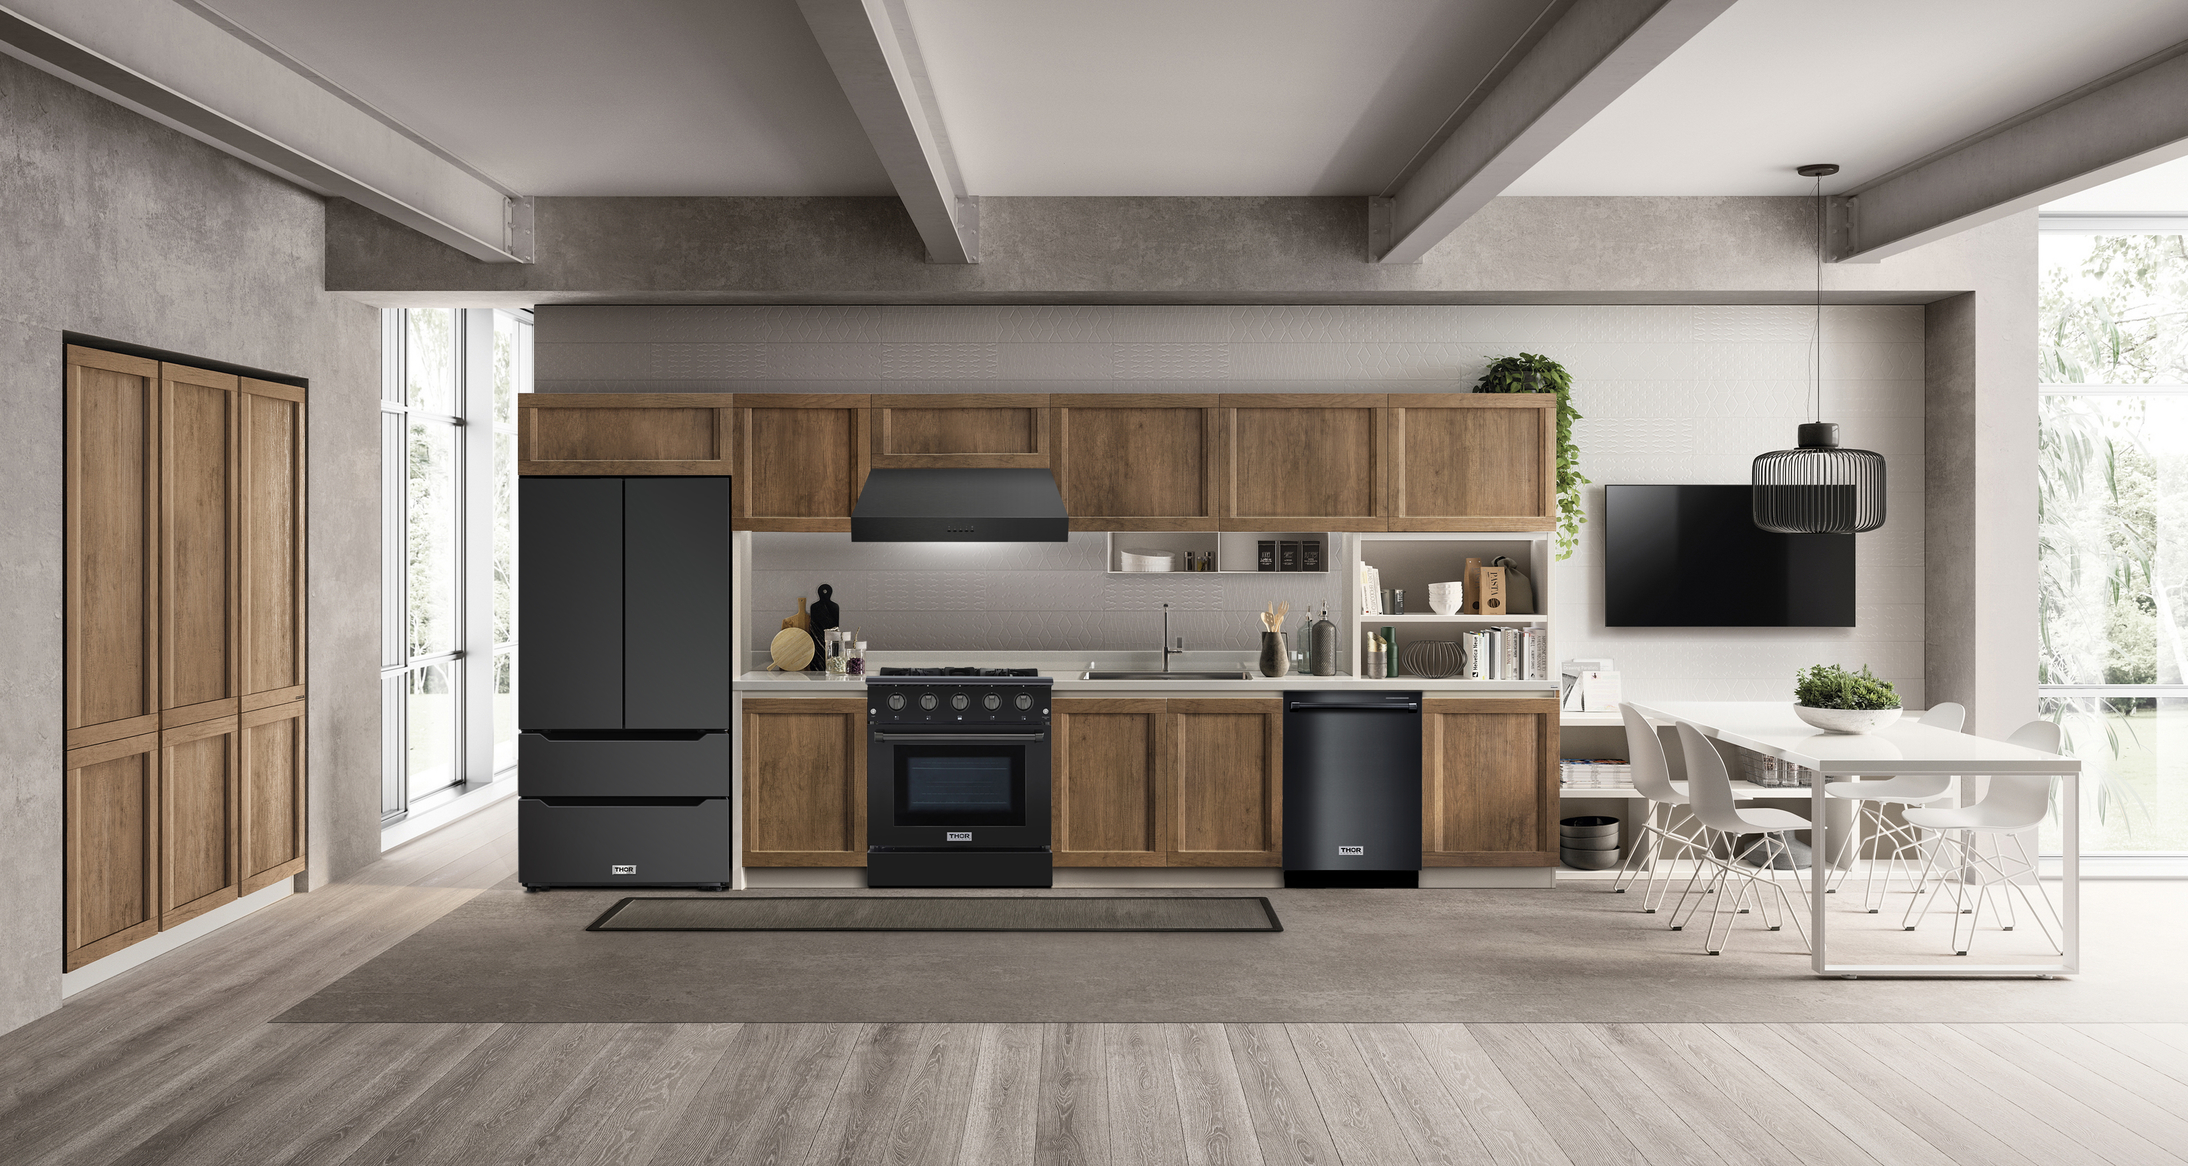 THOR Kitchen introduces a black stainless steel option for select appliances, including gas ranges, ventilation hoods, dishwashers and its new Recessed Handle Refrigerator. Shown: 30-inch suite.